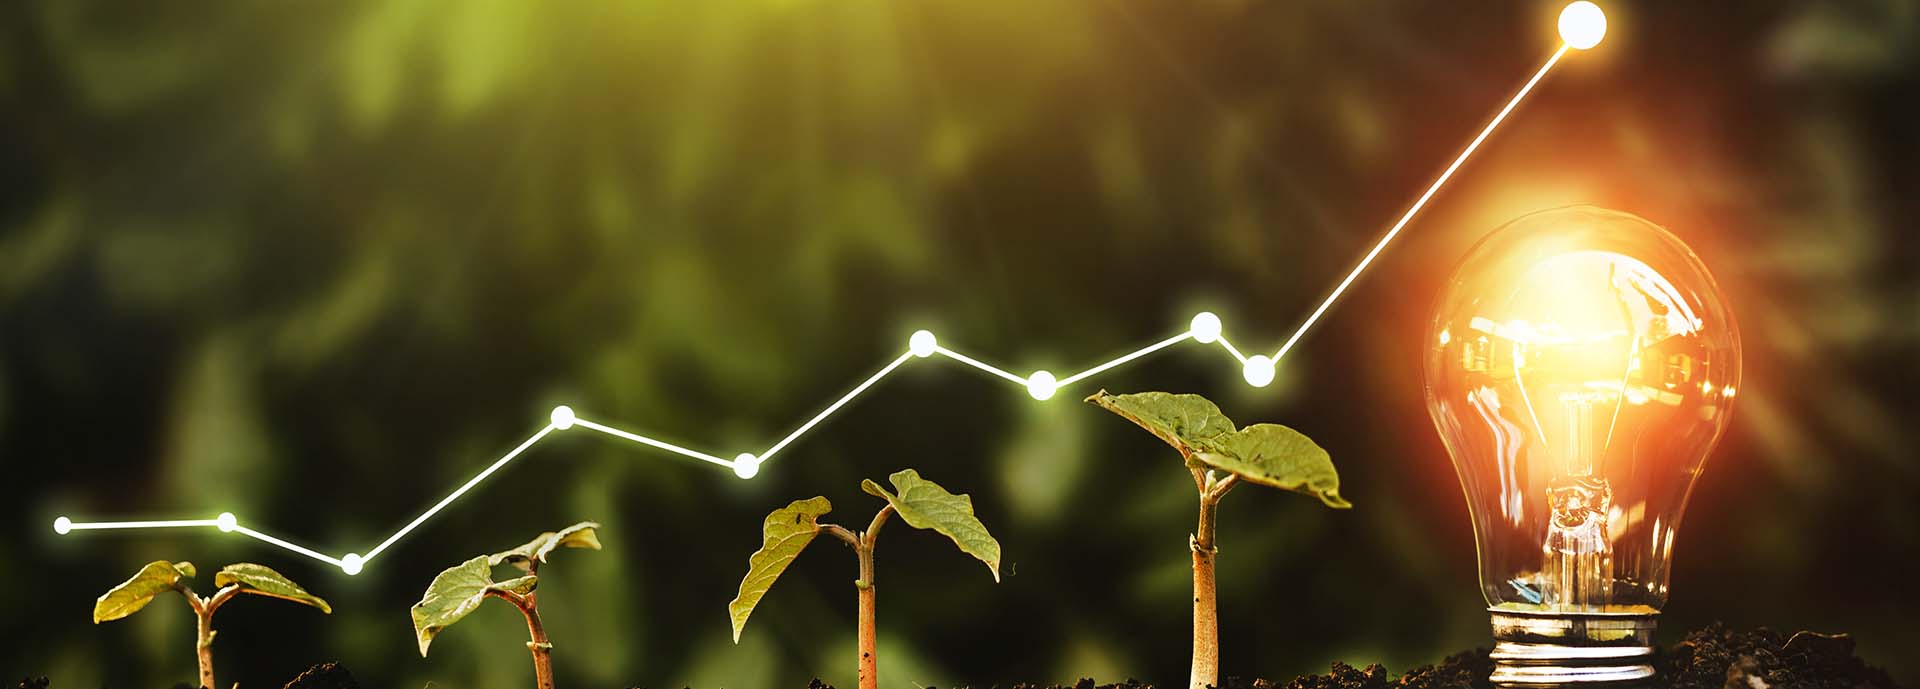 saplings growing in dirt getting larger from left to right with lit lightbulb on right and graph lines going up over the saplings and light bulb